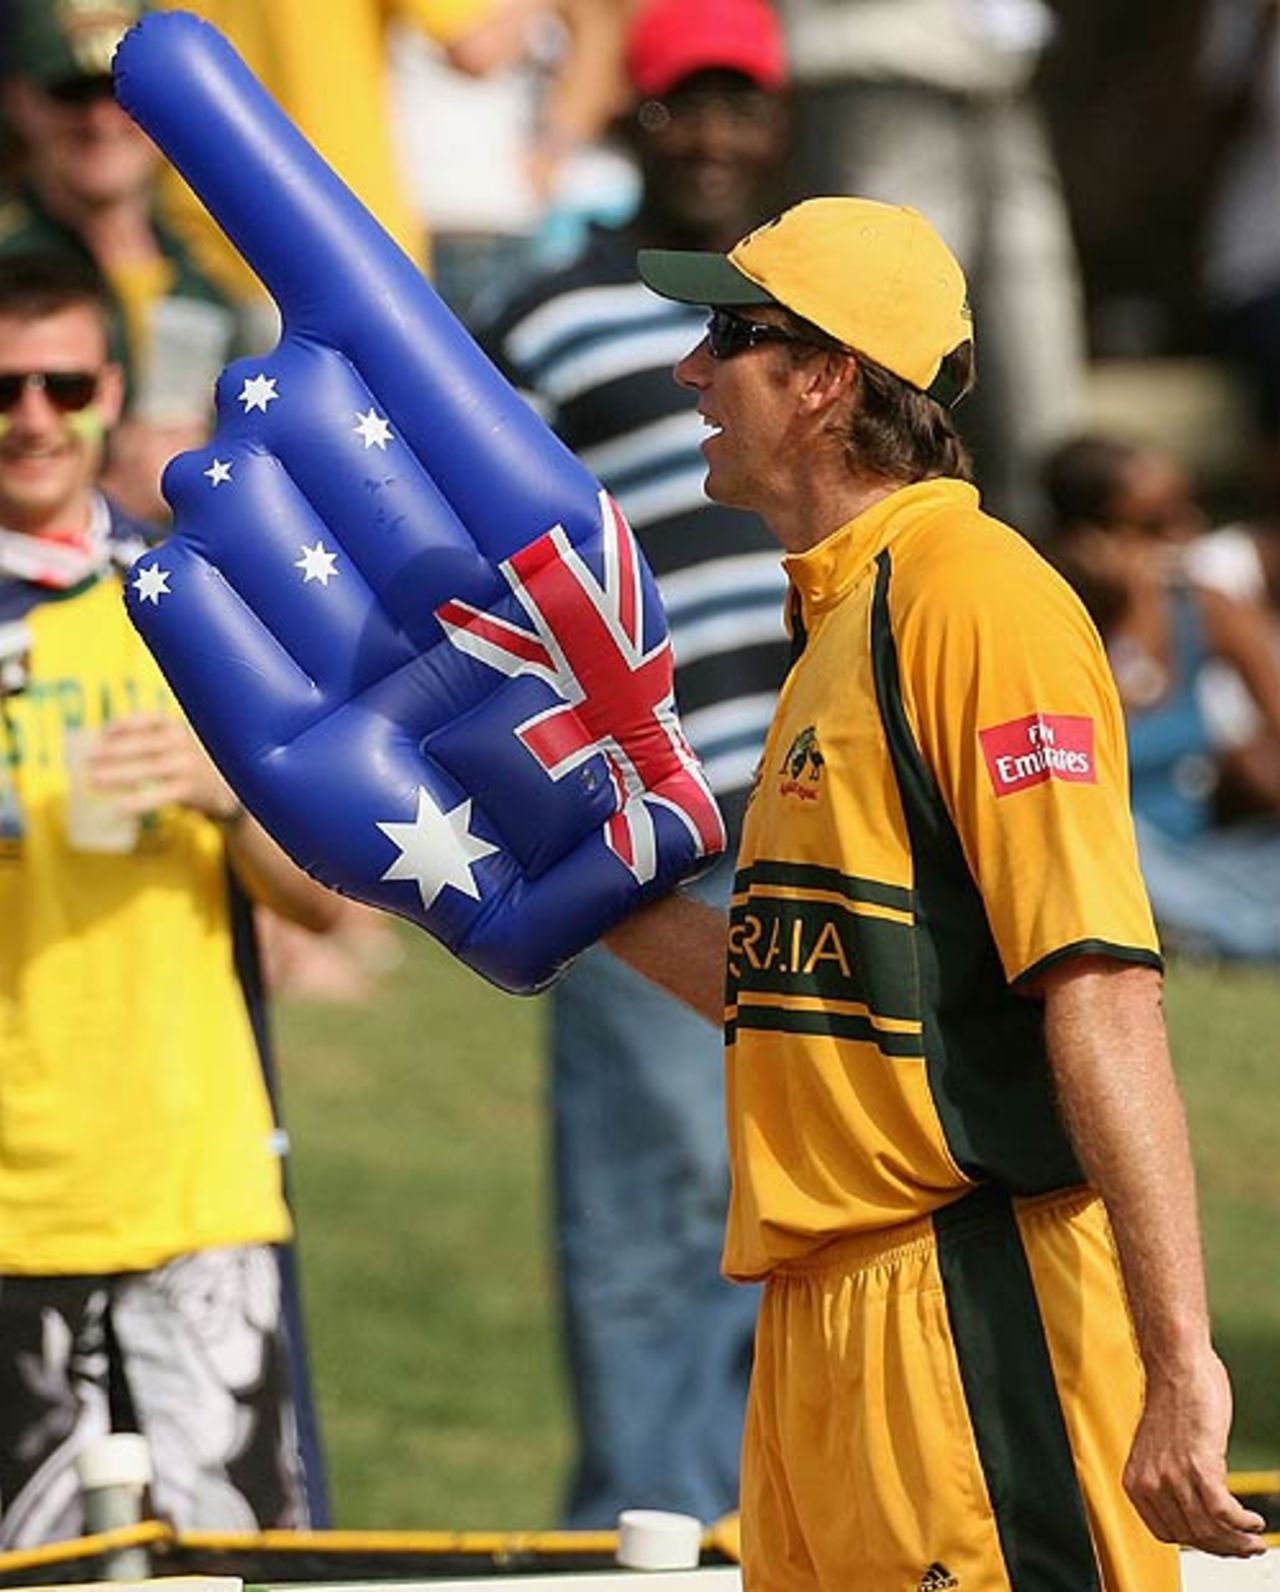 Glenn McGrath plays with an inflated finger much to the amusement of the Australian fans, Australia v Scotland, Group A, St Kitts, March 14, 2007